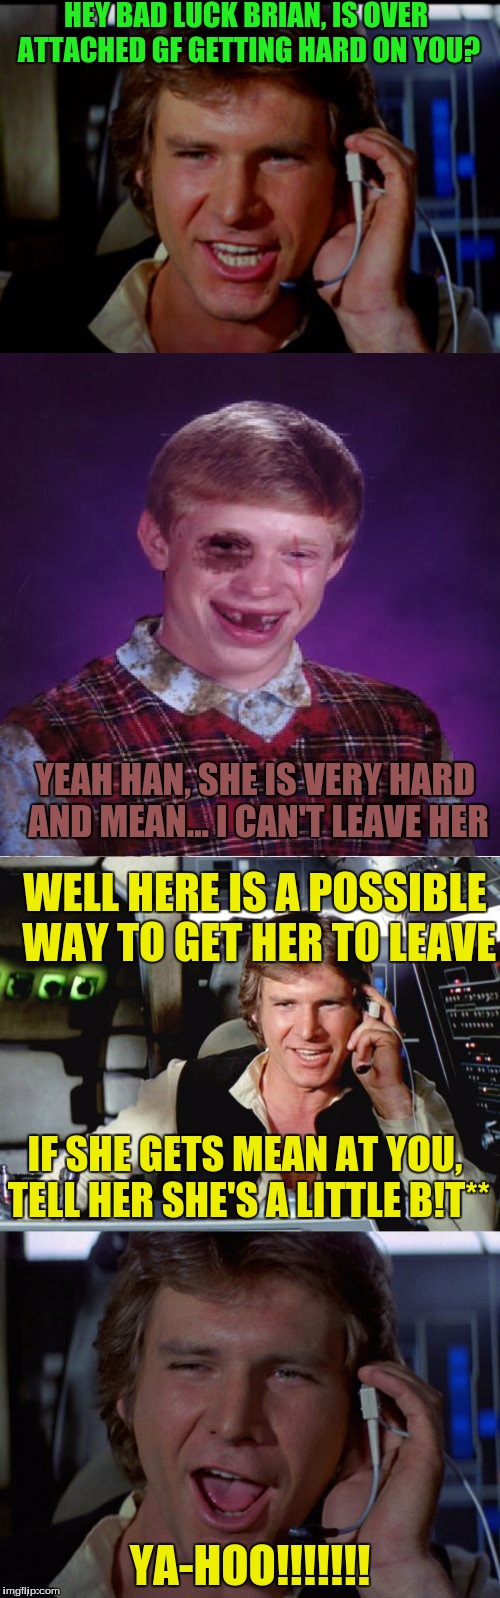 Bad pun han solo | HEY BAD LUCK BRIAN, IS OVER ATTACHED GF GETTING HARD ON YOU? YEAH HAN, SHE IS VERY HARD AND MEAN... I CAN'T LEAVE HER; WELL HERE IS A POSSIBLE WAY TO GET HER TO LEAVE; IF SHE GETS MEAN AT YOU, TELL HER SHE'S A LITTLE B!T**; YA-HOO!!!!!!! | image tagged in bad pun han solo | made w/ Imgflip meme maker